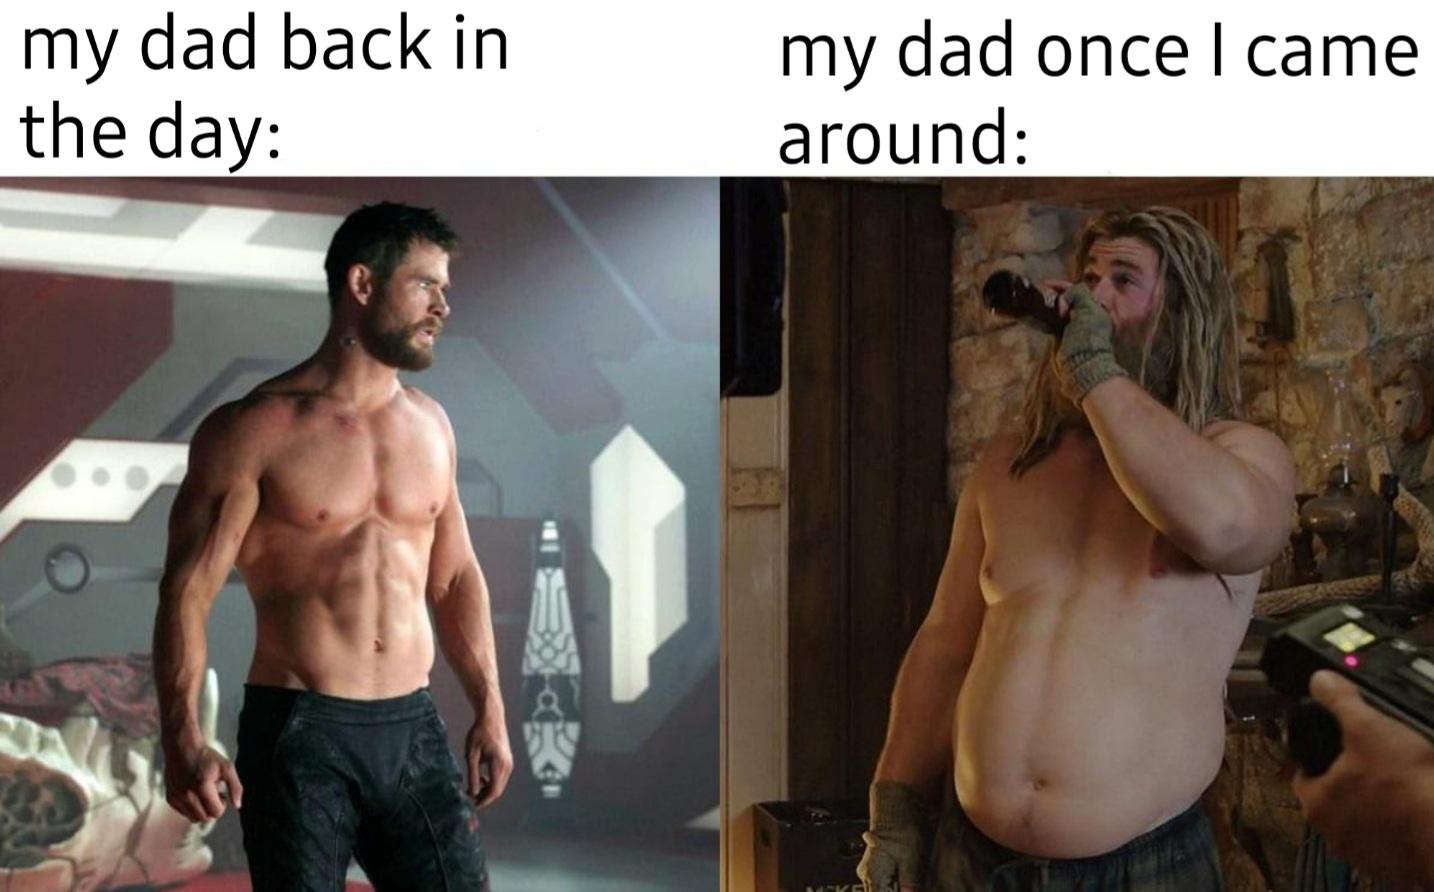 chris hemsworth thor - my dad back in the day my dad once I came around